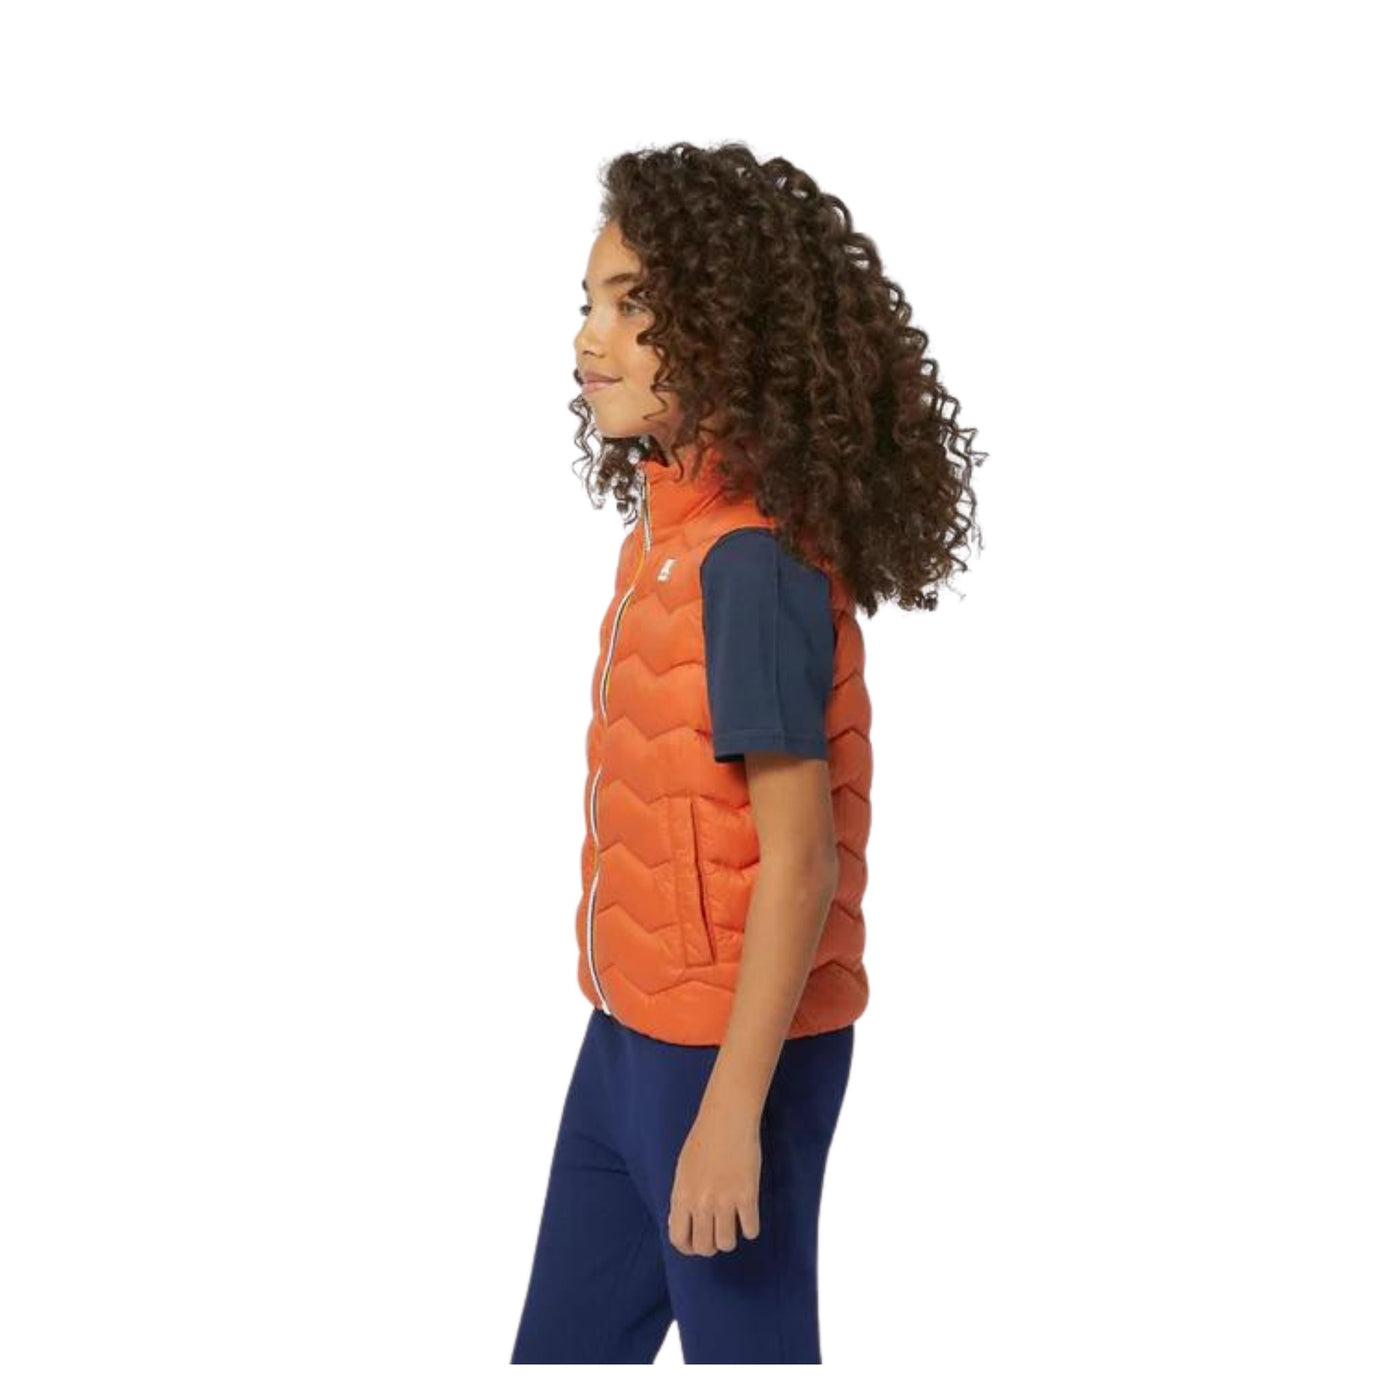 Quilted Child Sleeveless